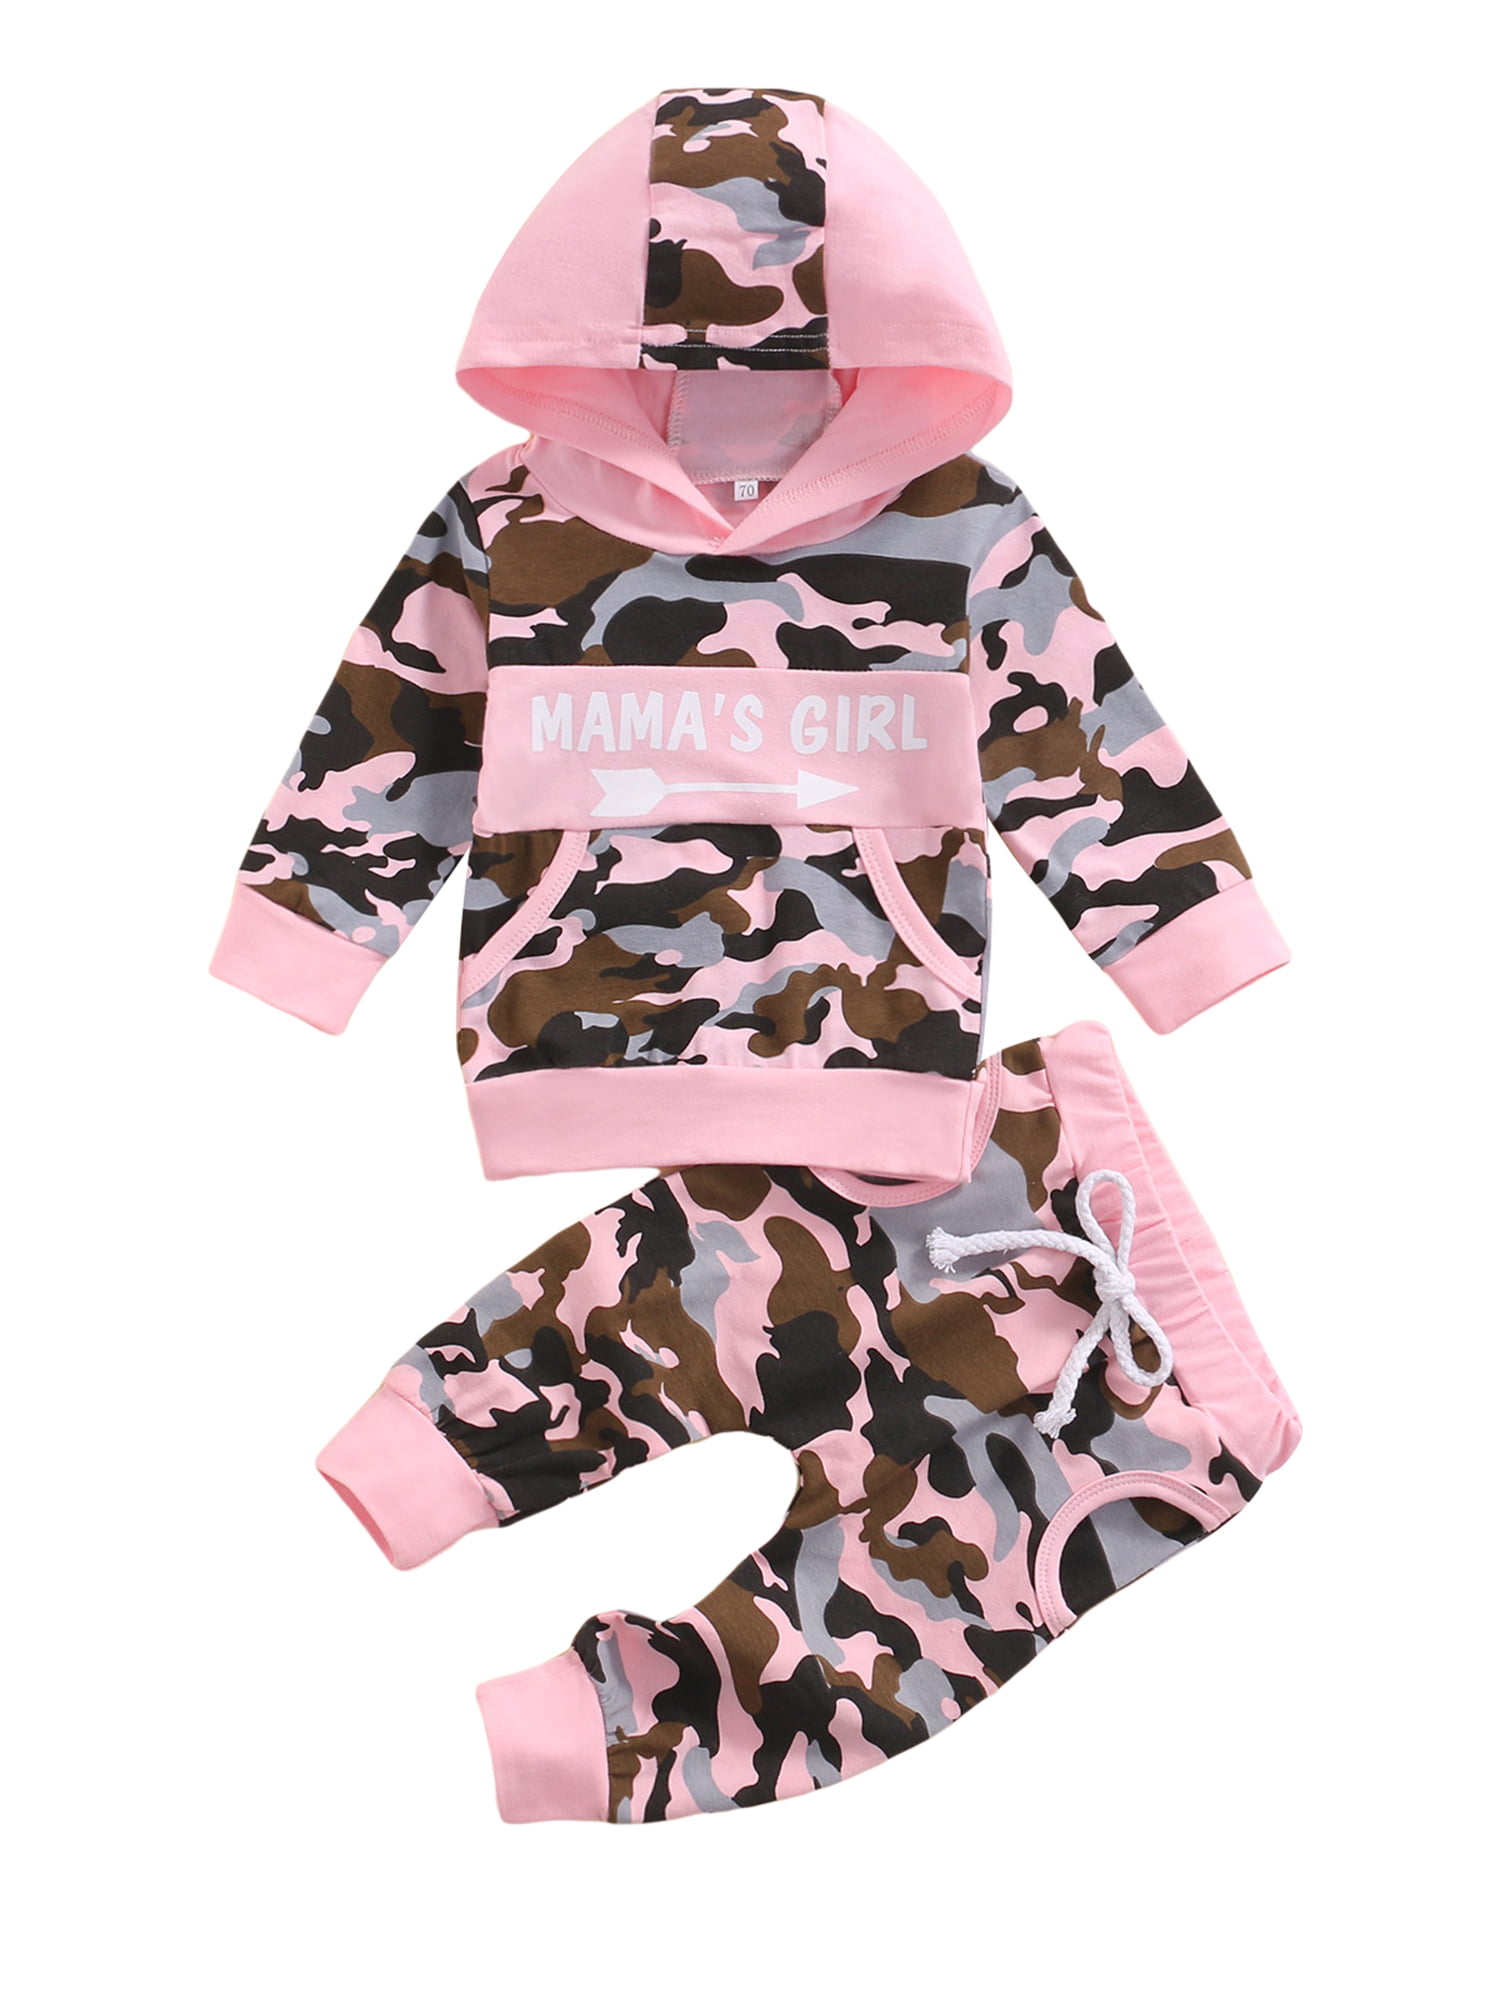 Toddler Baby Girls Long Sleeve Strawberry Printed Hooded Cute Ears Zipper Sweat Shirts Tops and Pants Outfits 0-18M 